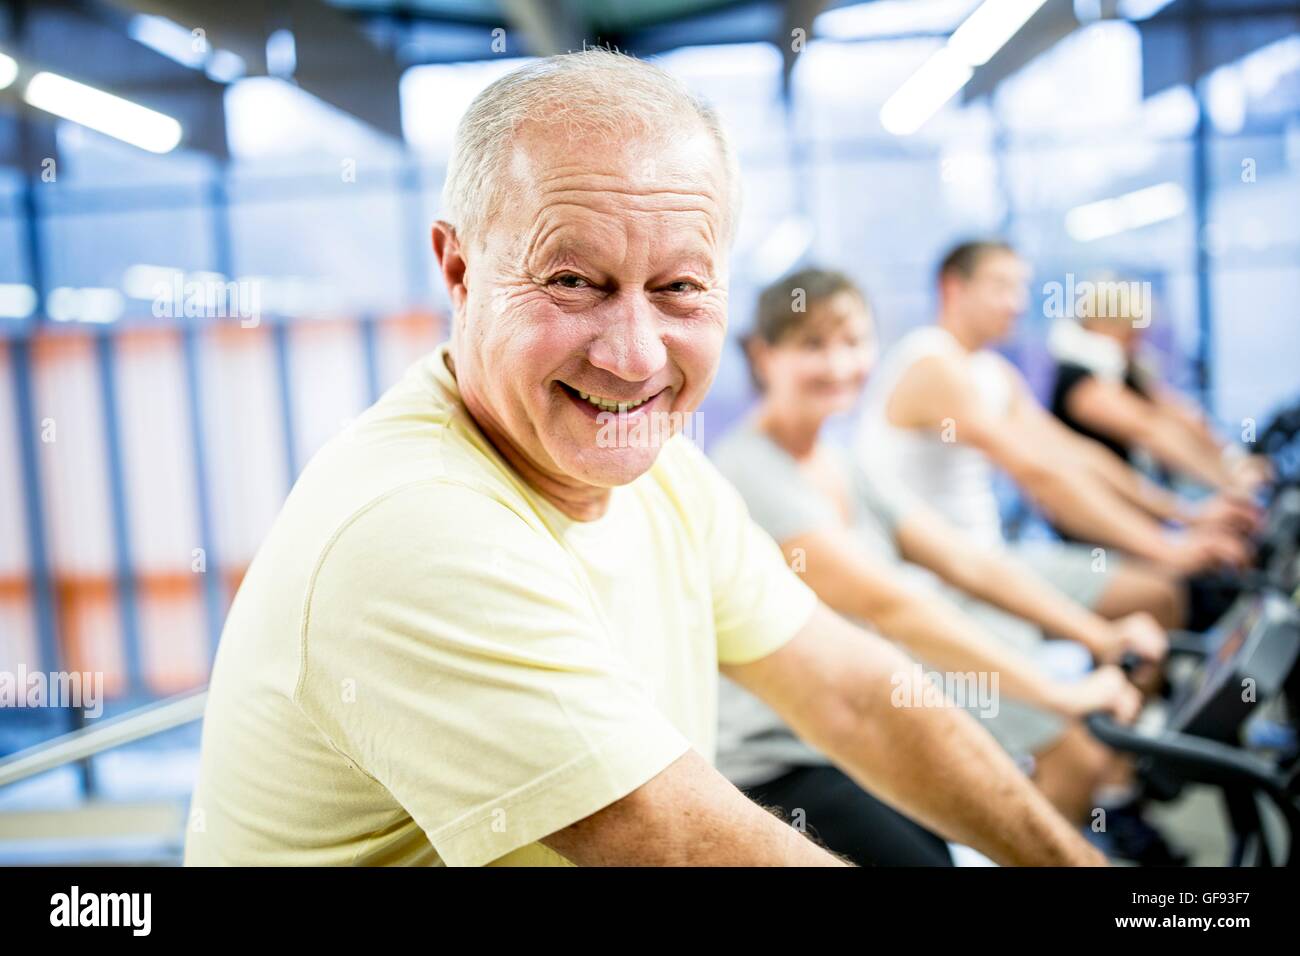 PROPERTY RELEASED. MODEL RELEASED. Portrait senior man exercising on stationary bicycle in gym. Stock Photo